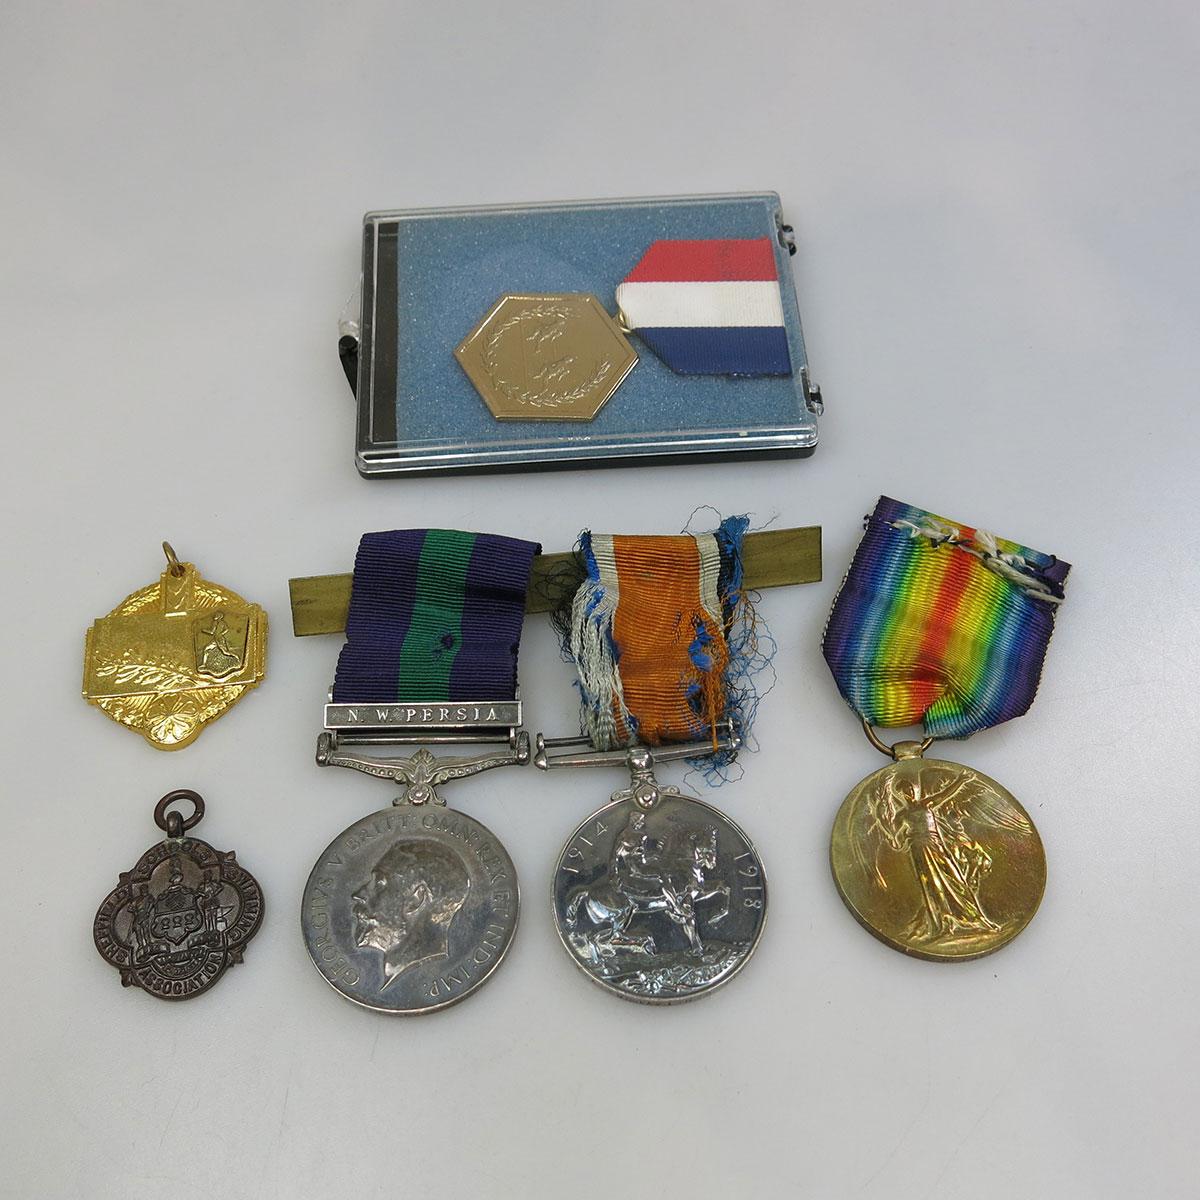 George V General Service Medal With NW Persia Bar